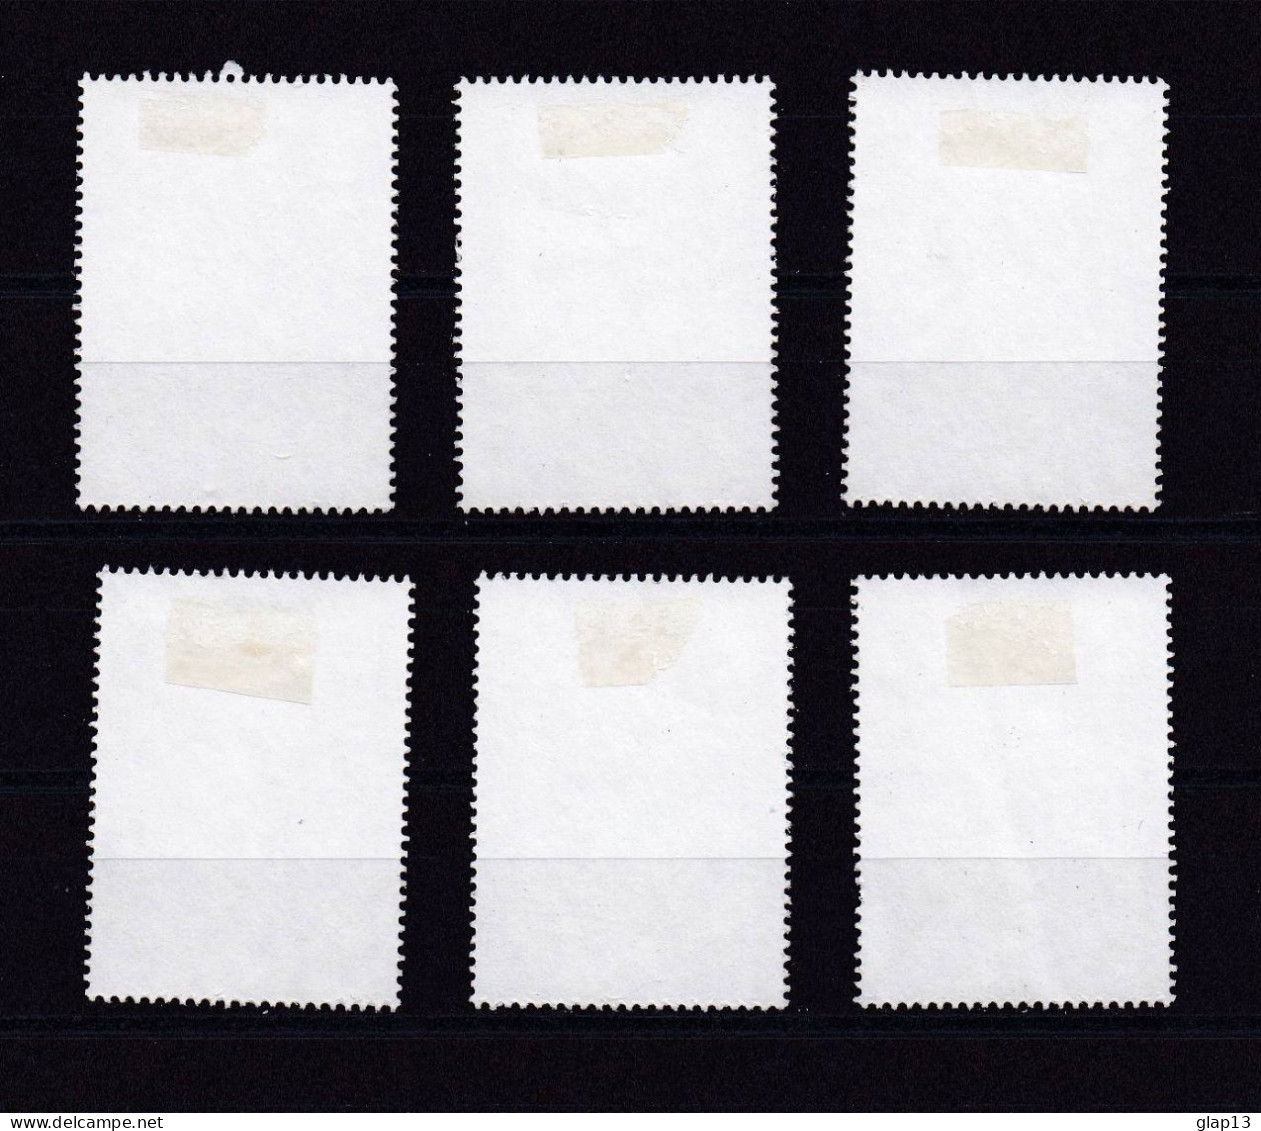 GRANDE-BRETAGNE 2003 TIMBRE N°2480/85 OBLITERE MUSEE - Used Stamps